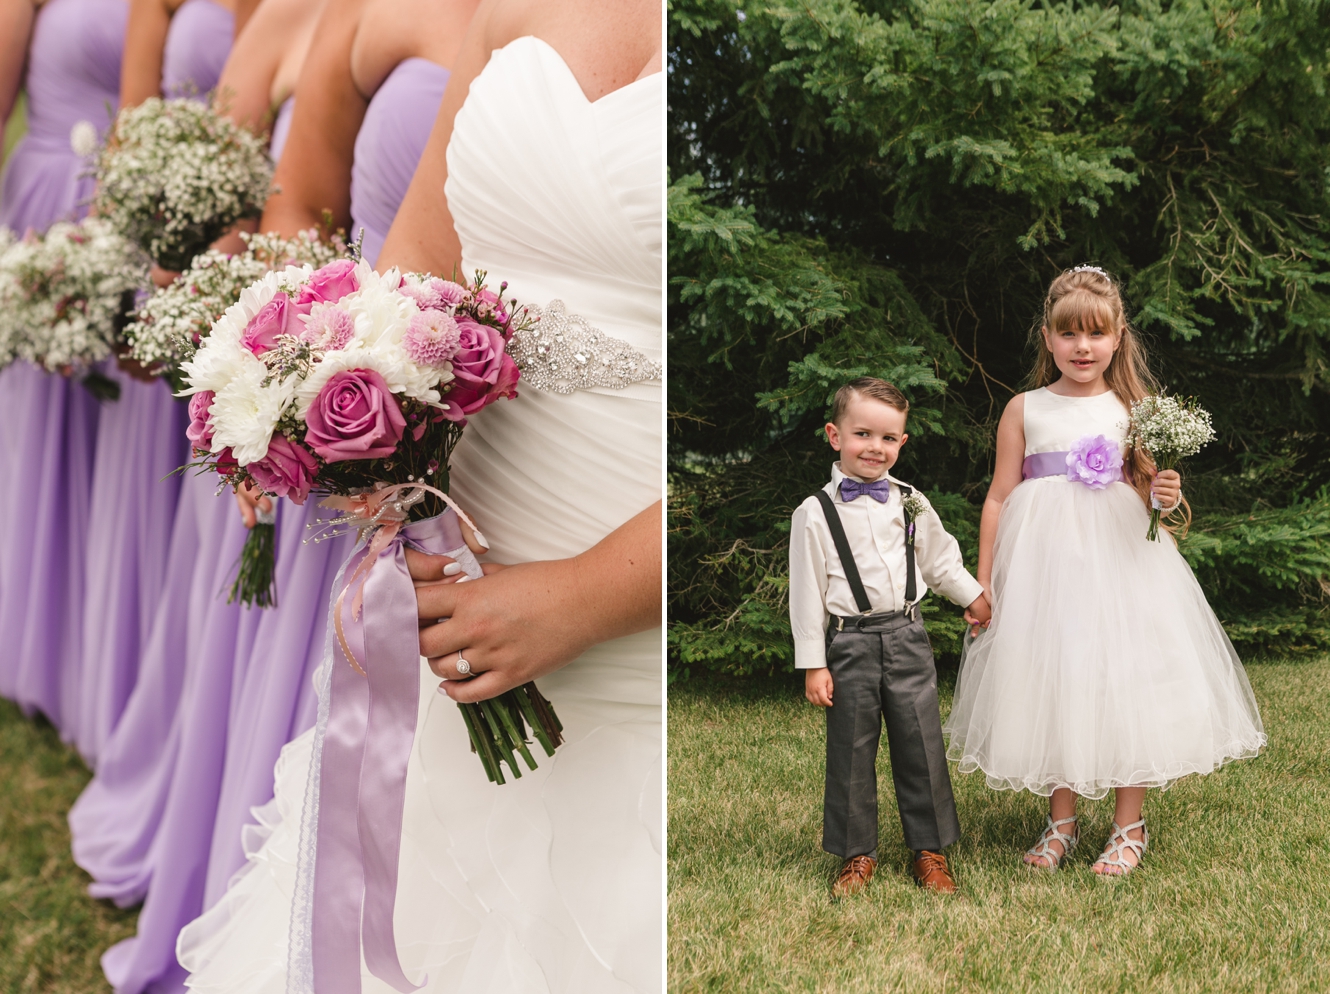 How to incorporate kids into weddings photo